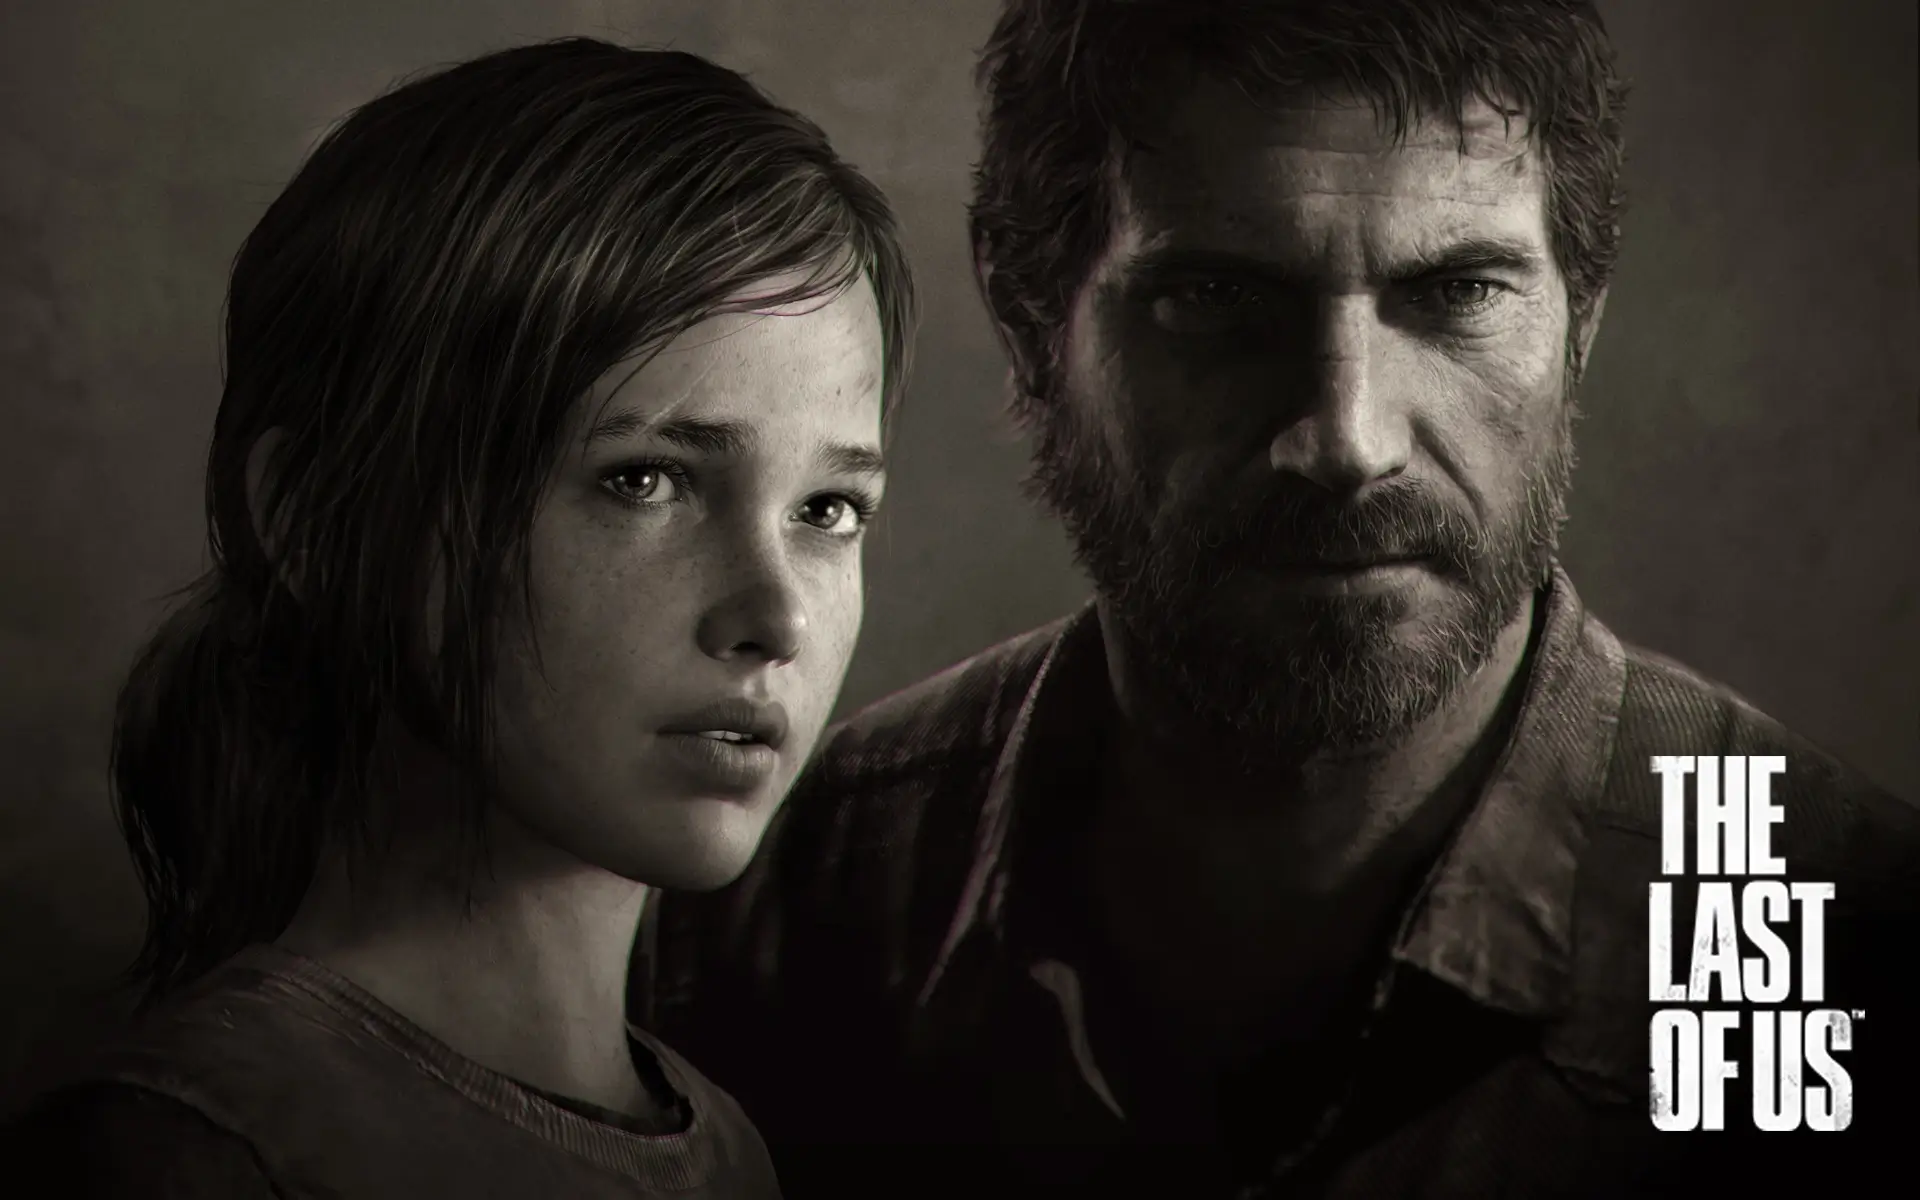 The Last of Us: A Retrospective on the Acclaimed Game and Series